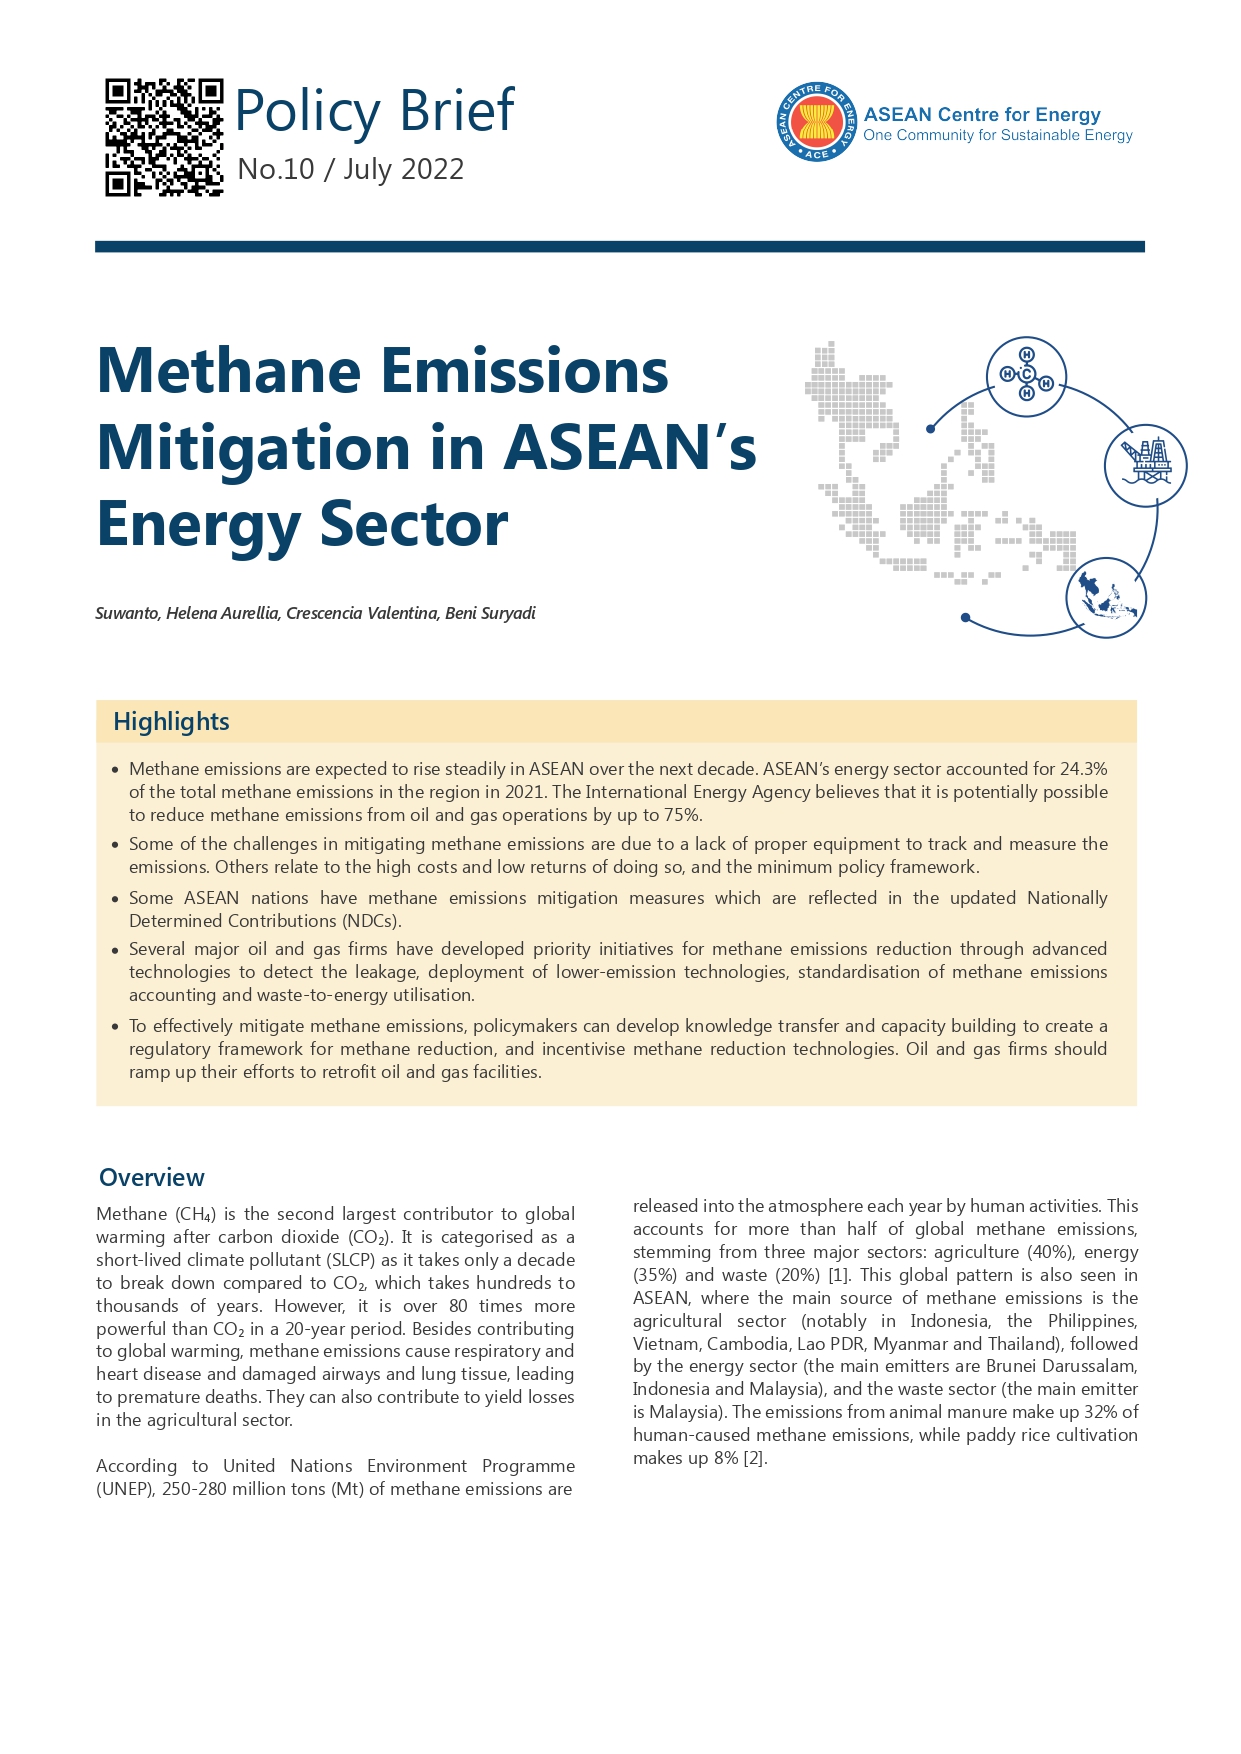 PB 10 2022_Methane Emissions Mitigation in ASEAN’s Energy Sector-1_page-0001